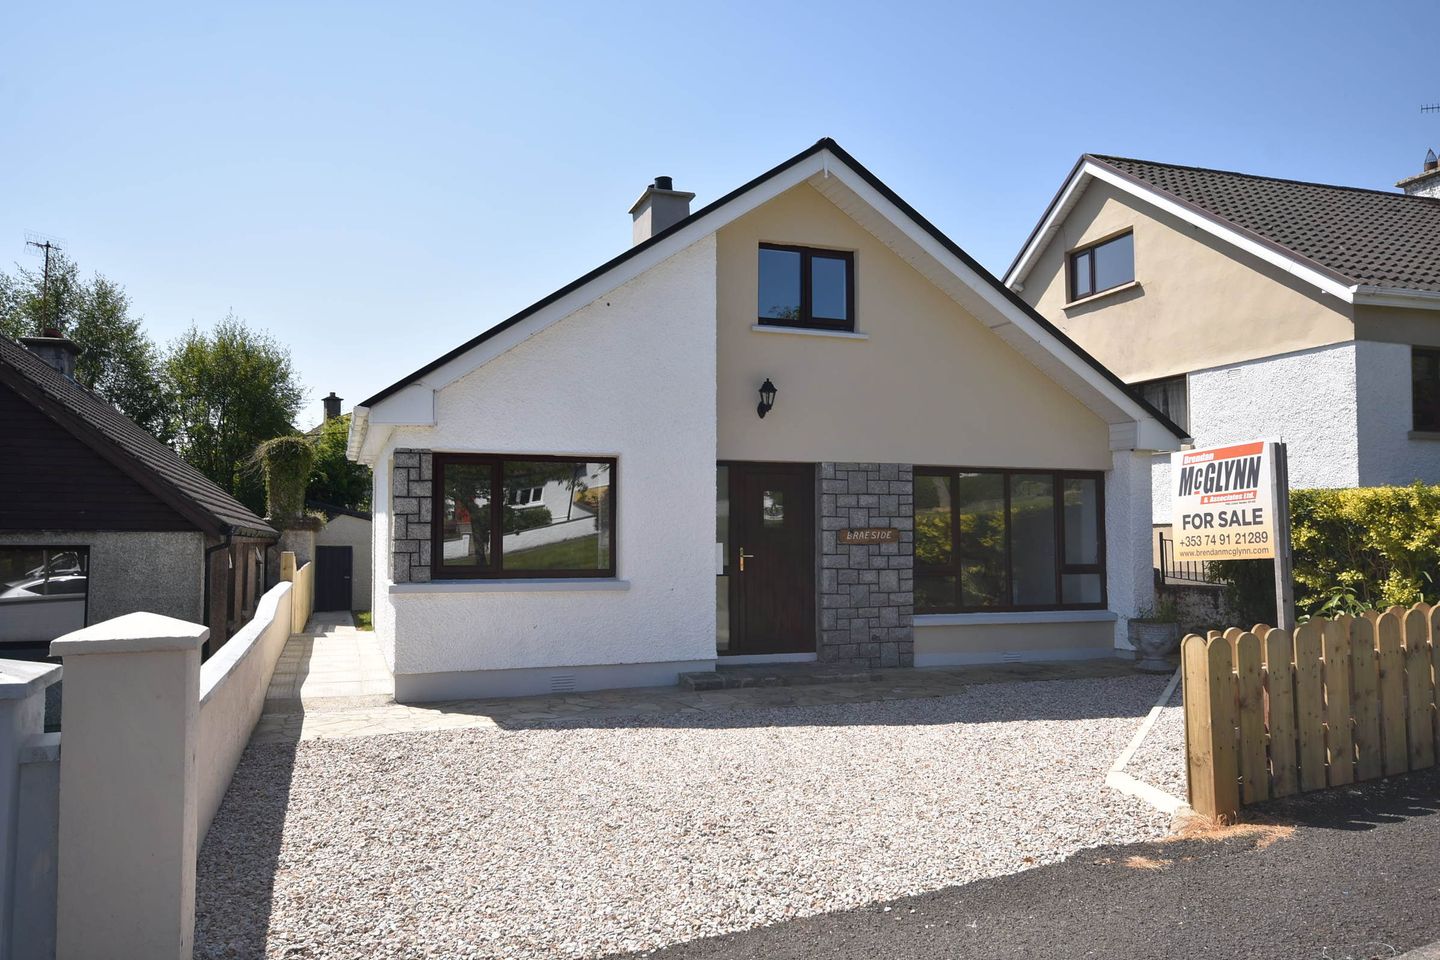 Brae Side, Iona Road, Letterkenny, Co. Donegal, F92XDT4